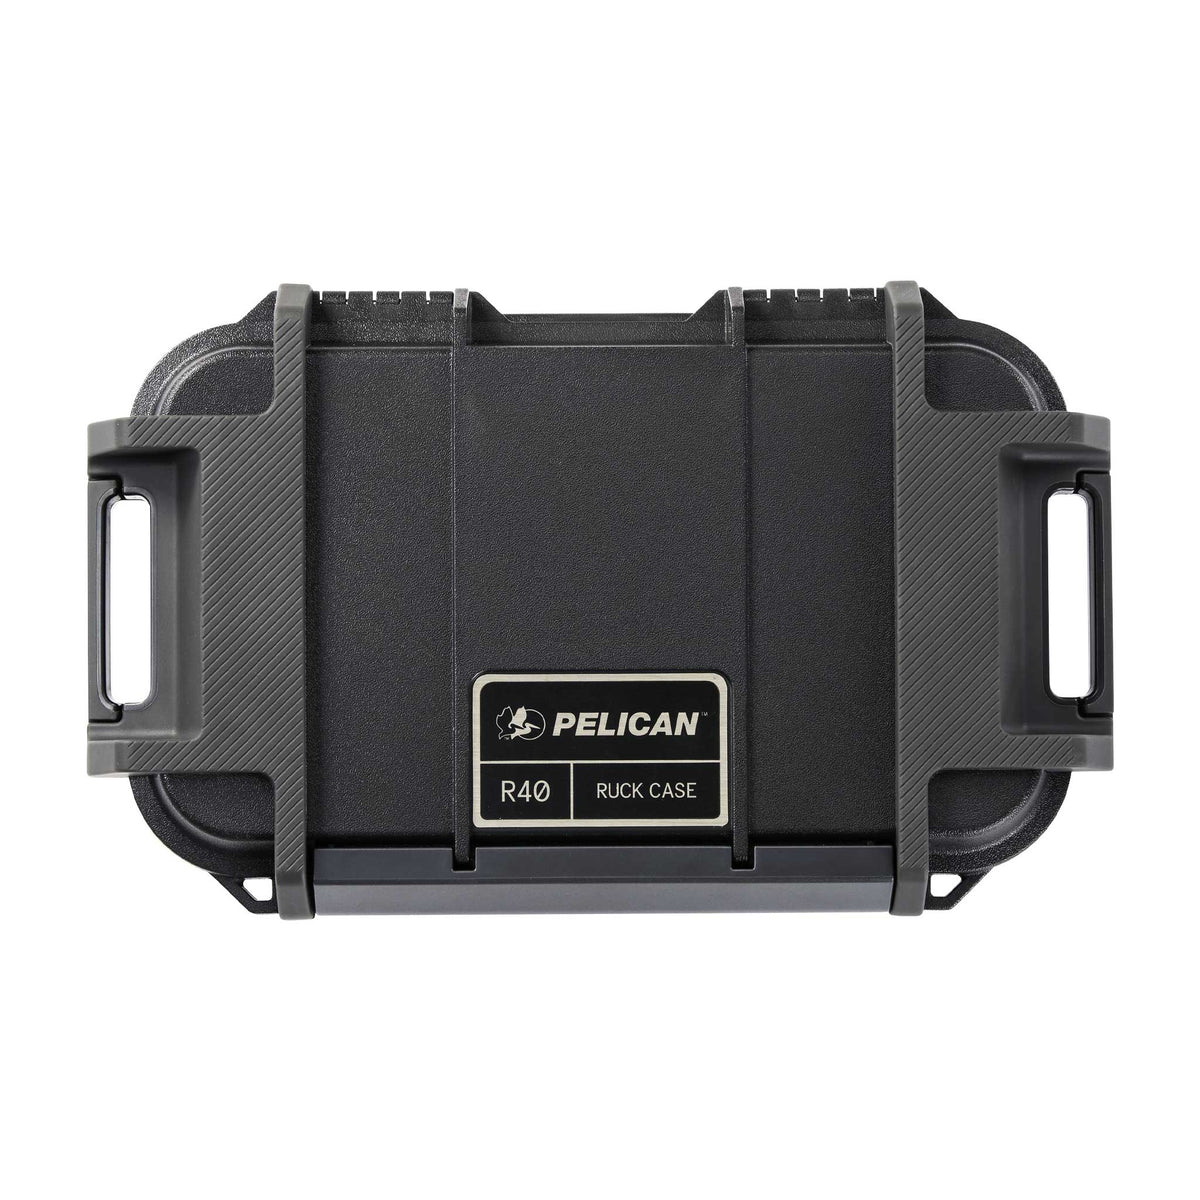 Pelican Ruck Case - The Ultimate Dry Box